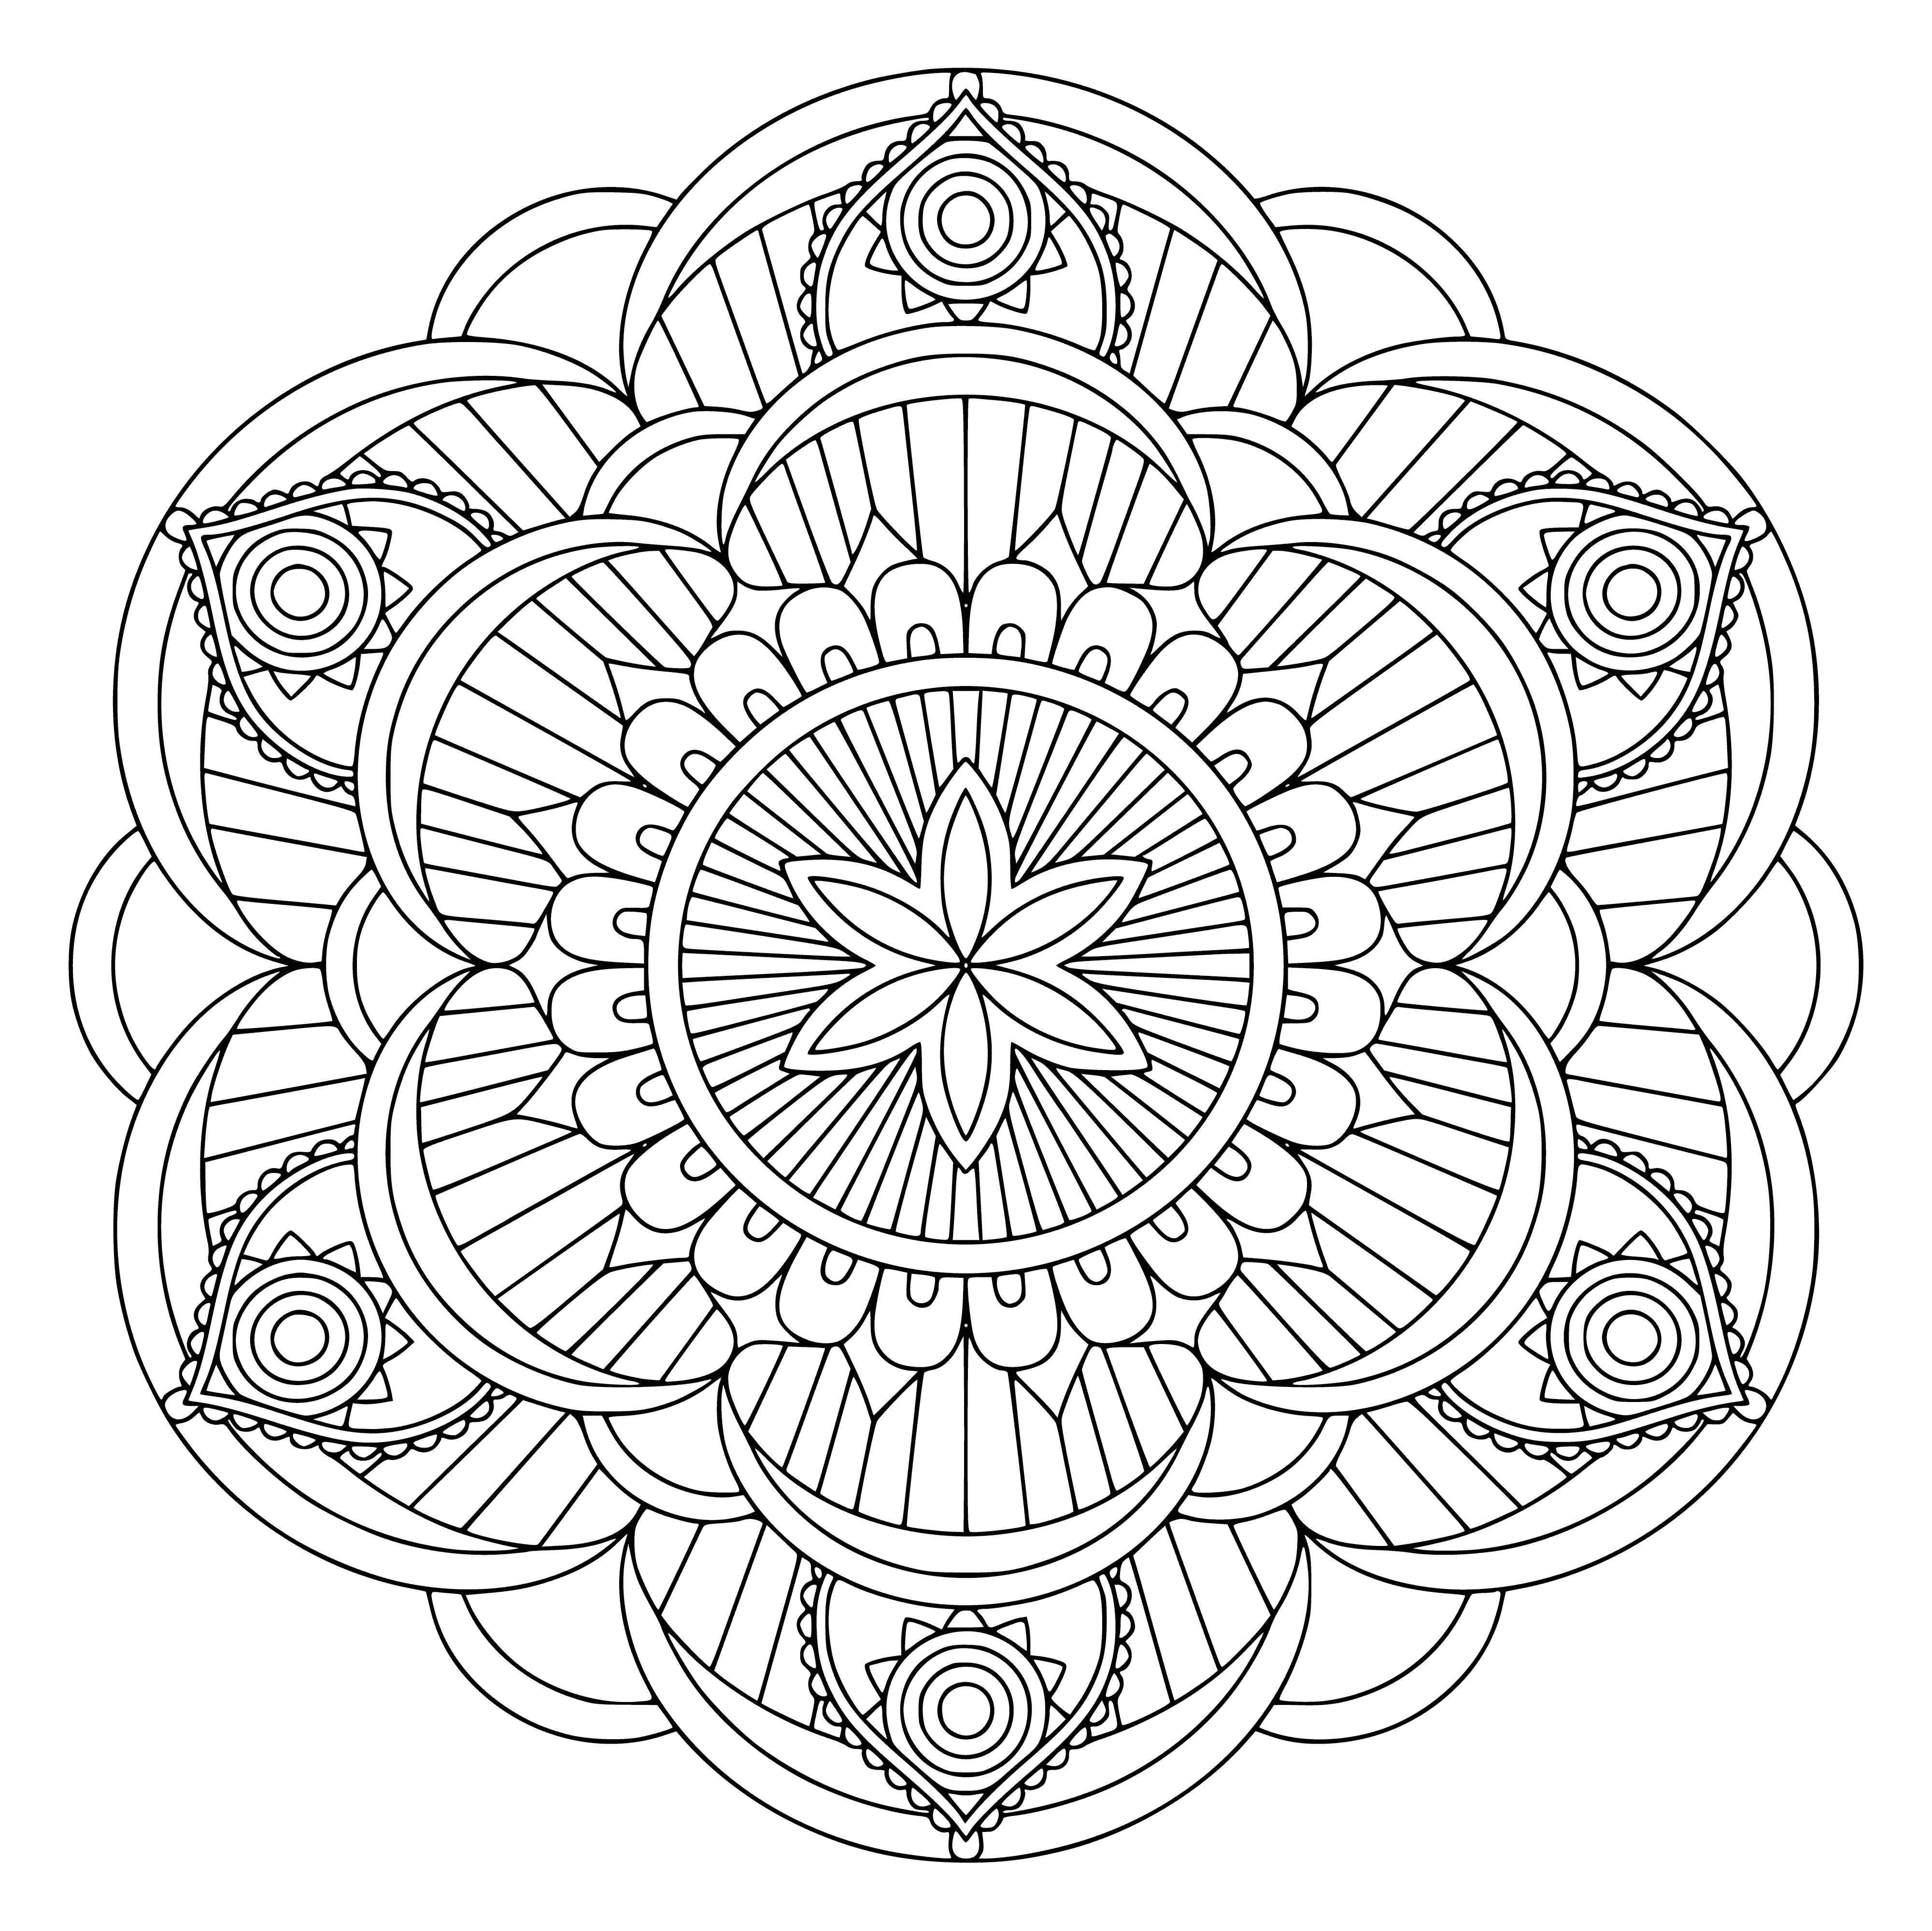 coloring page: Pretty mandala has big flower in center, surrounded by smaller flowers, leaves, and colorful vines. Intricate and full of color.